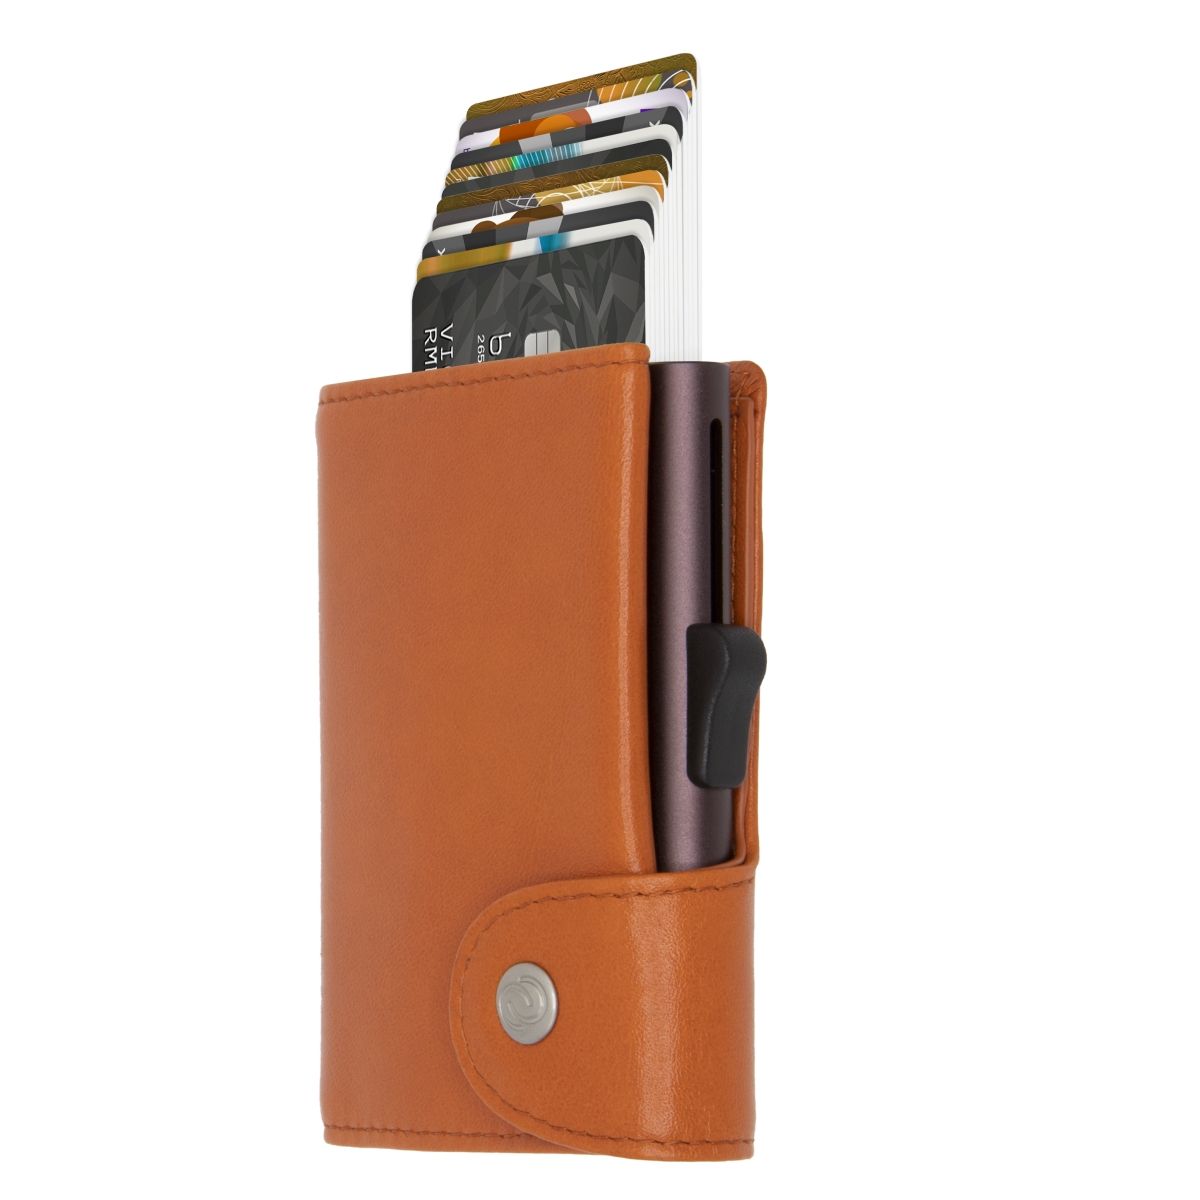 C-Secure XL Aluminum Wallet with Genuine Leather - Chestnut Brown